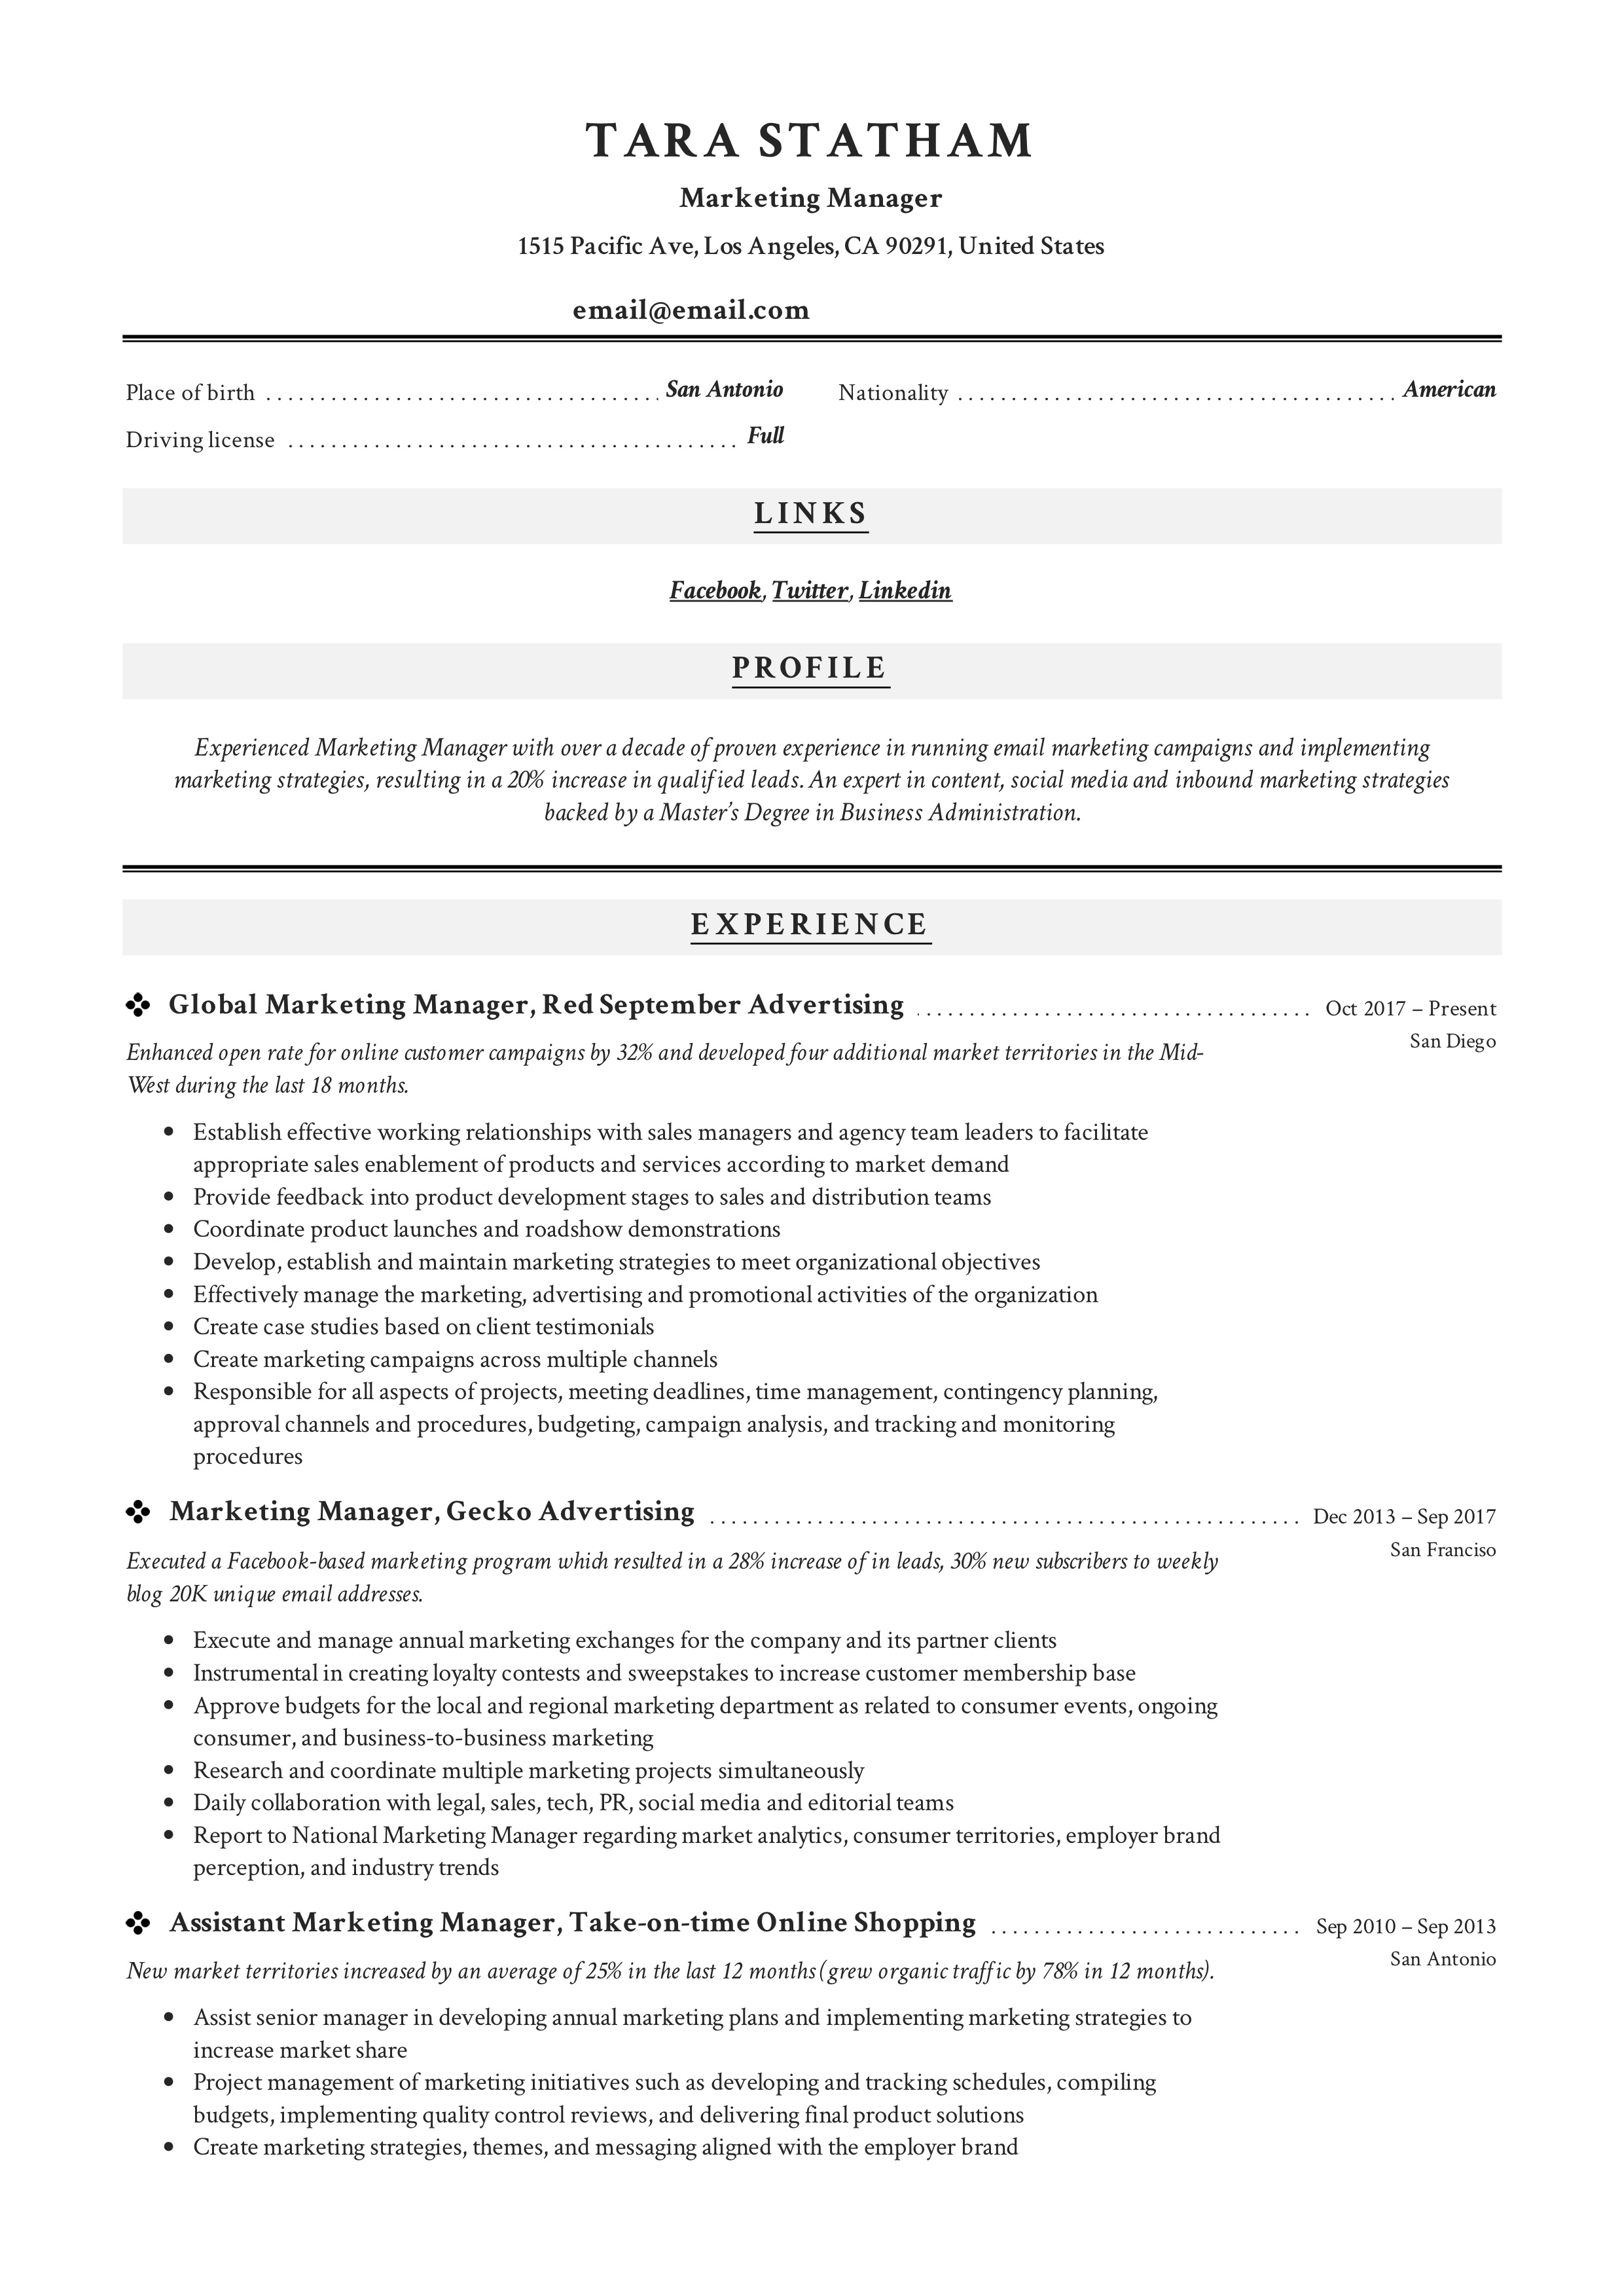 classic and modern example resume marketing manager